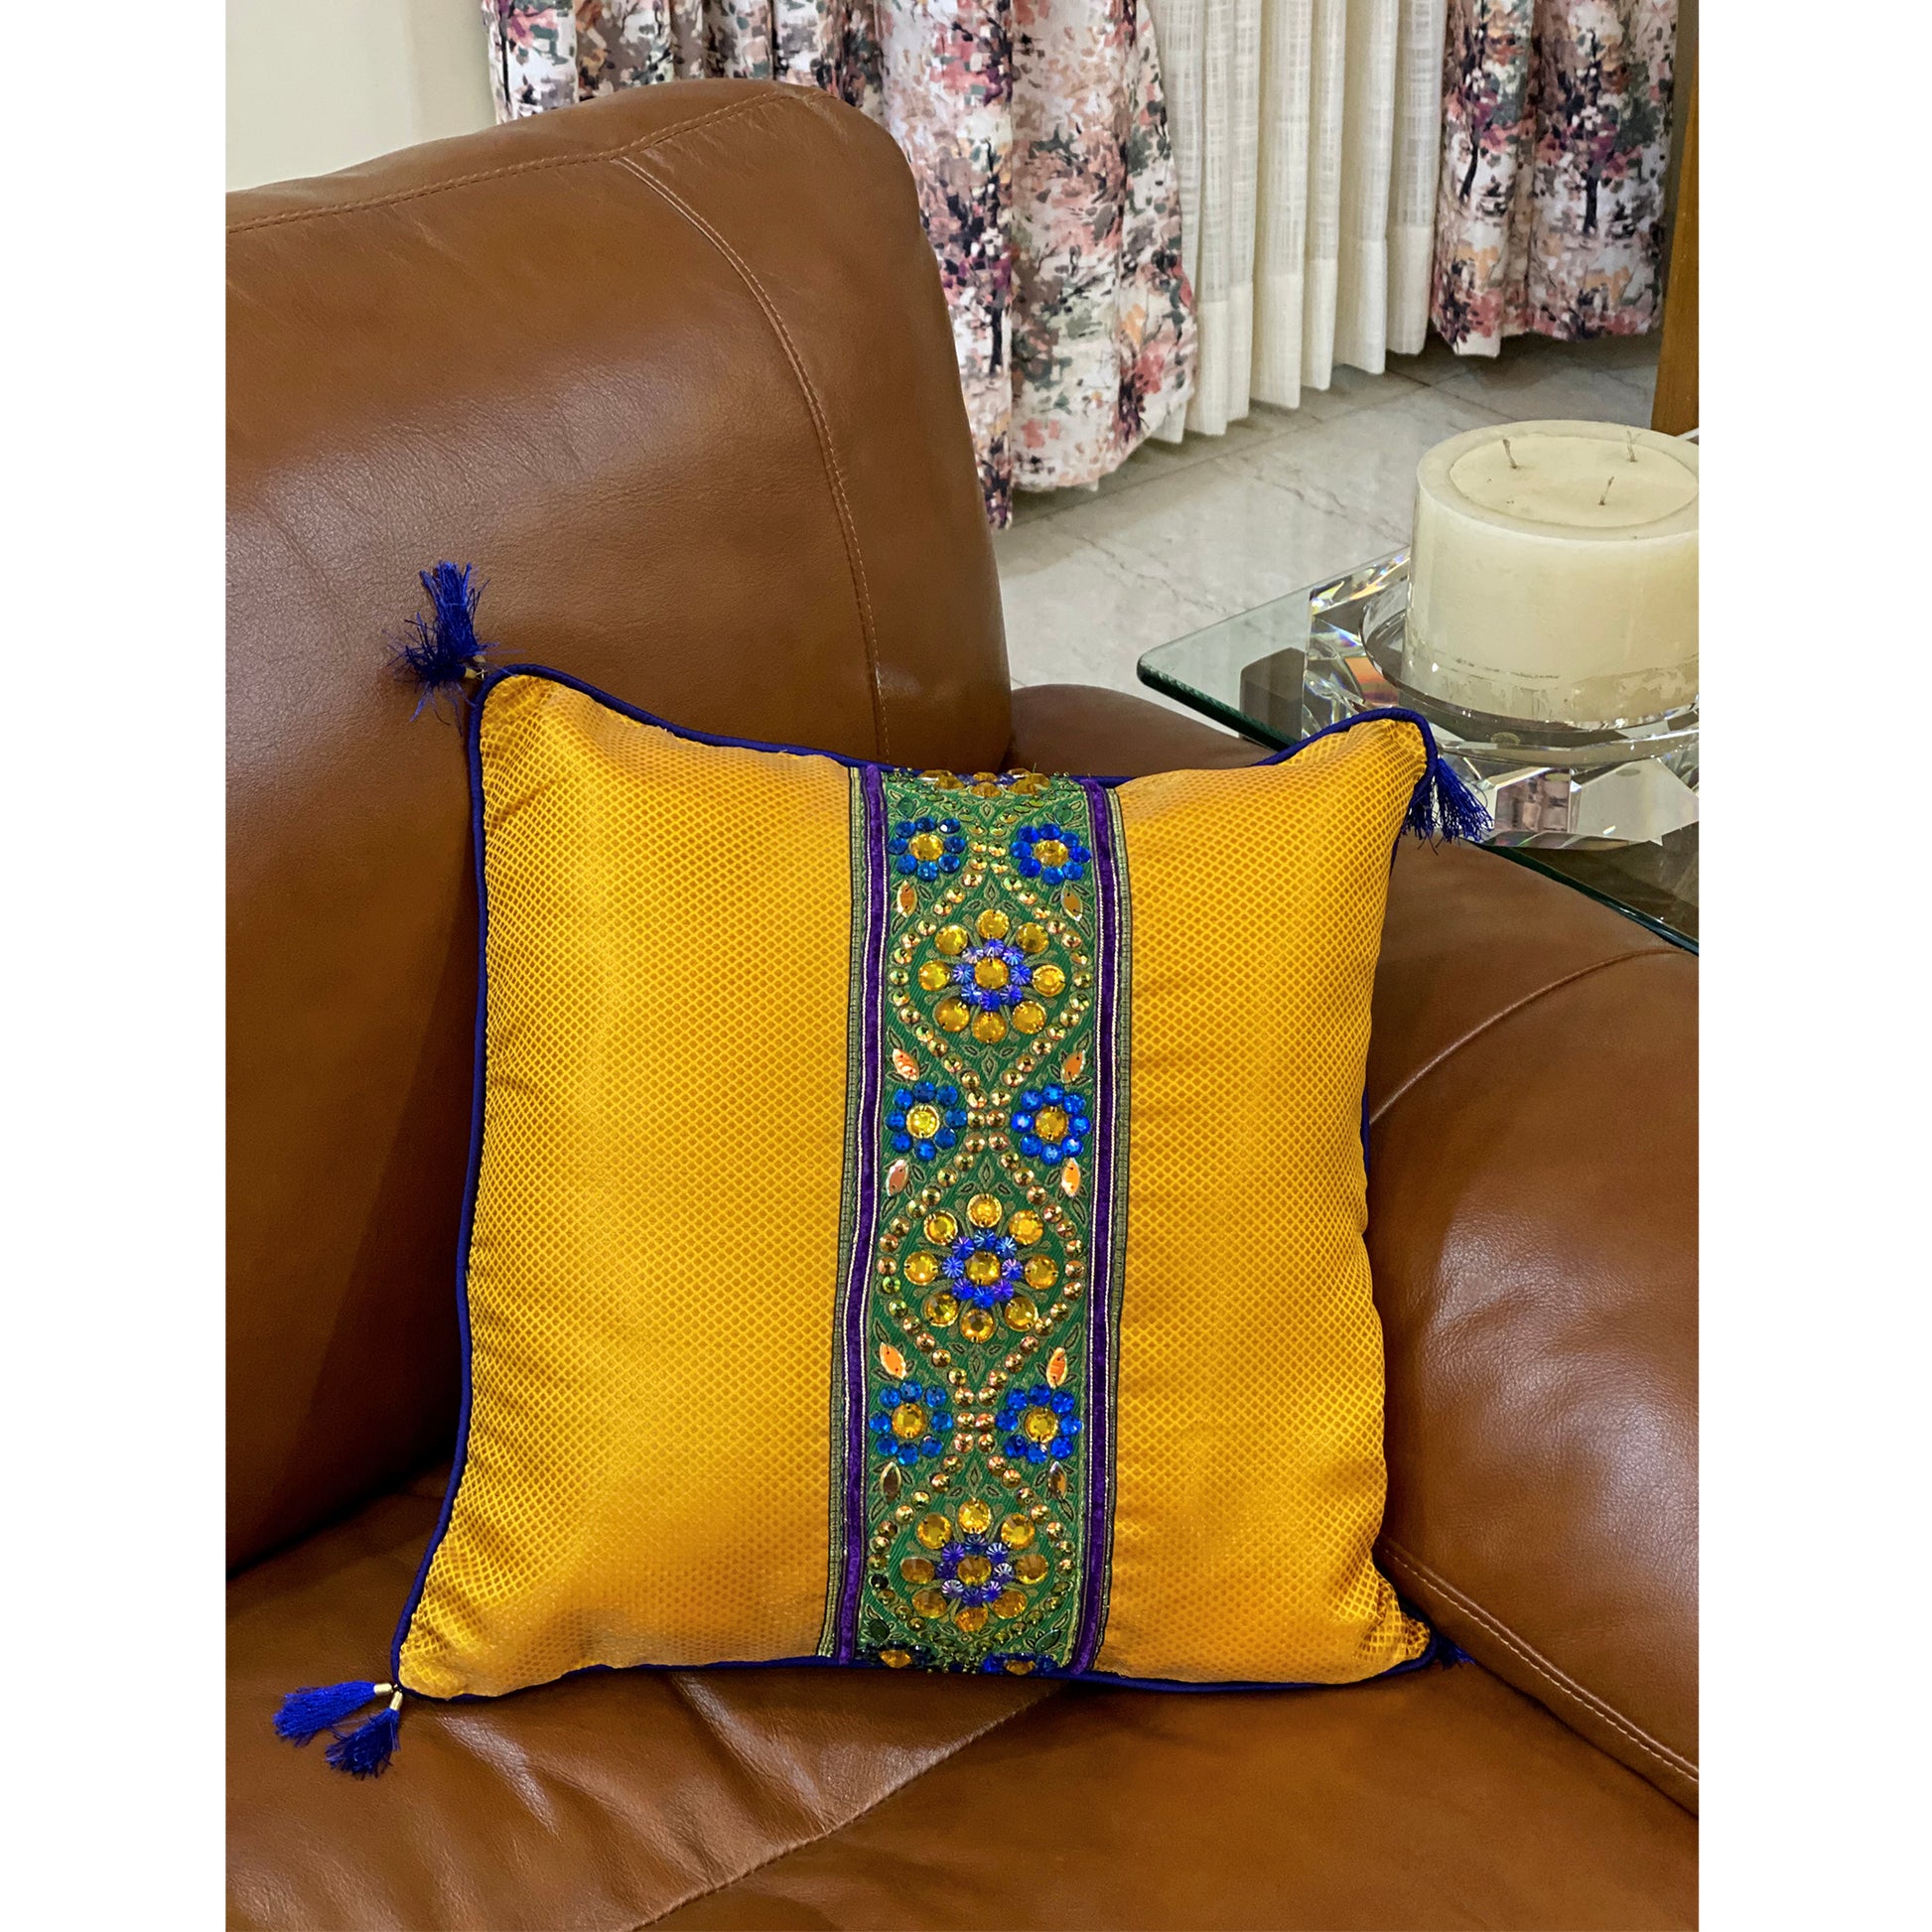 brocade-cushion-cover-in-yellow-and-blue-colour